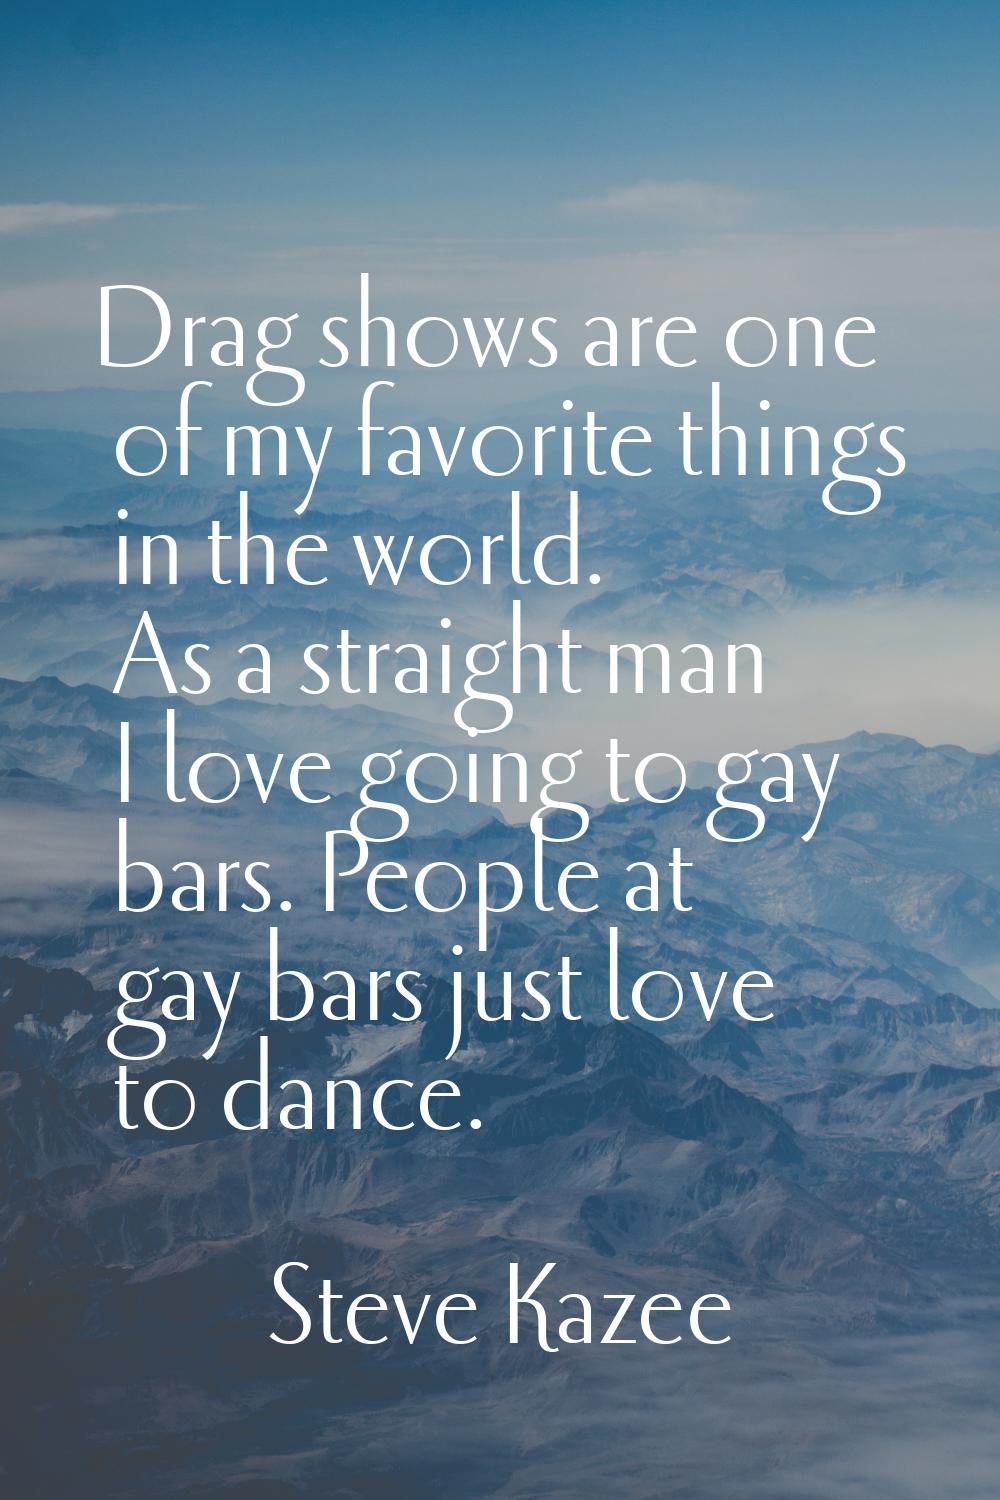 Drag shows are one of my favorite things in the world. As a straight man I love going to gay bars. 